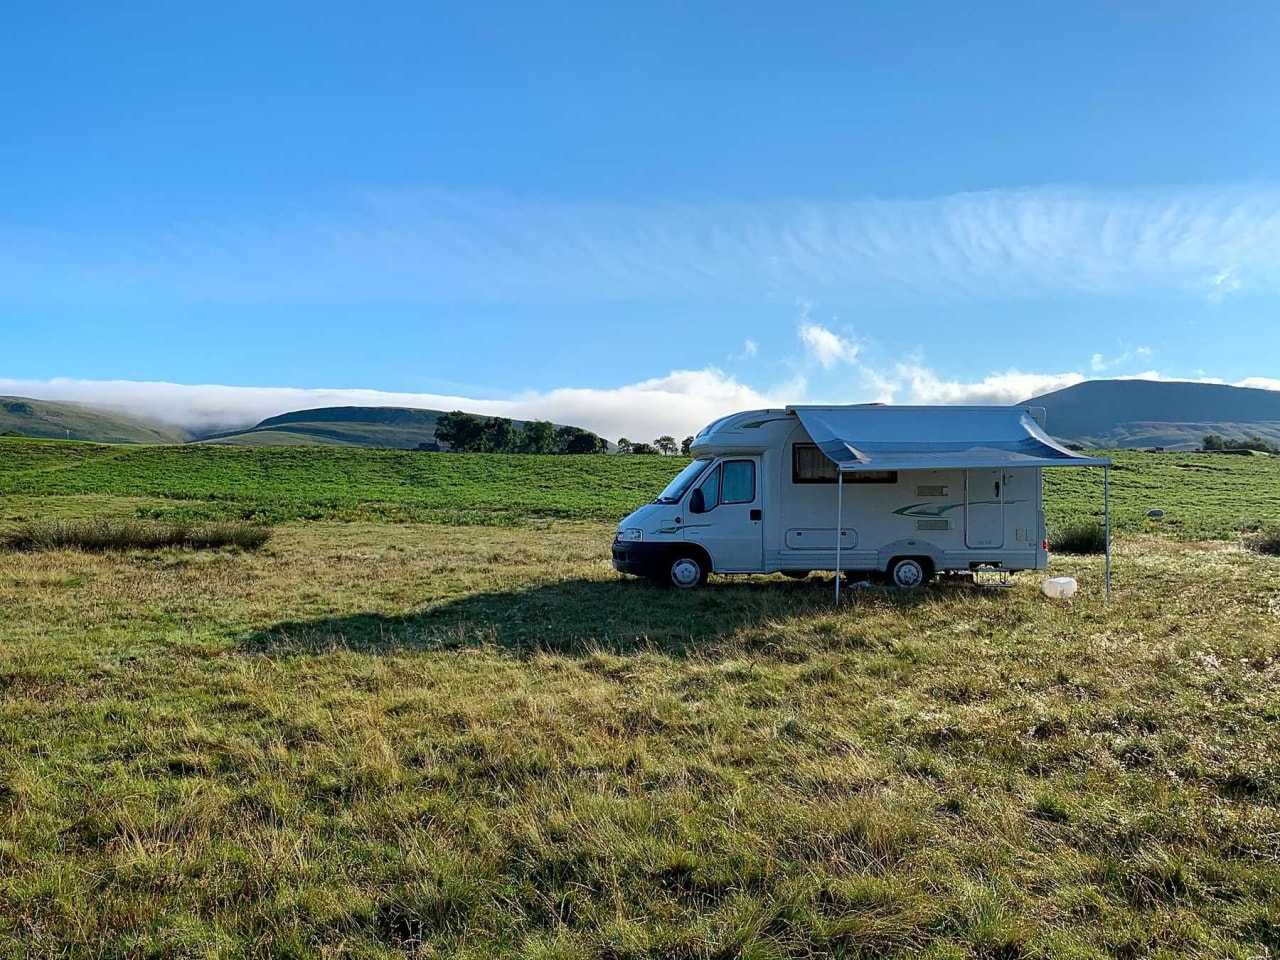 A self-contained motorhome lets you stay at wild campsites like this one in Cumbria